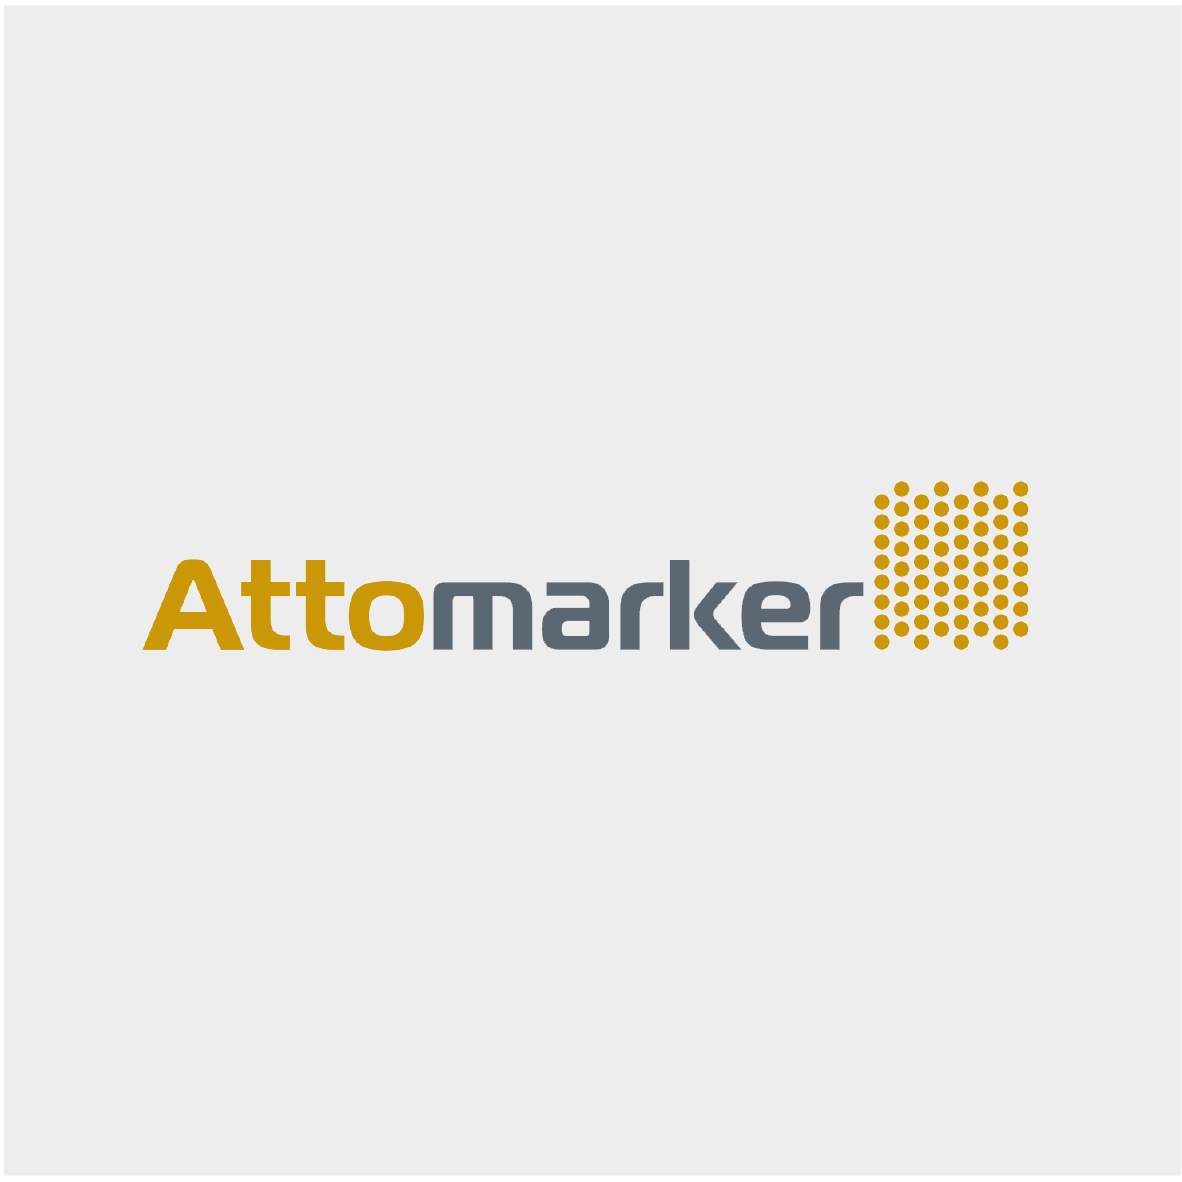 Attomarker Seed